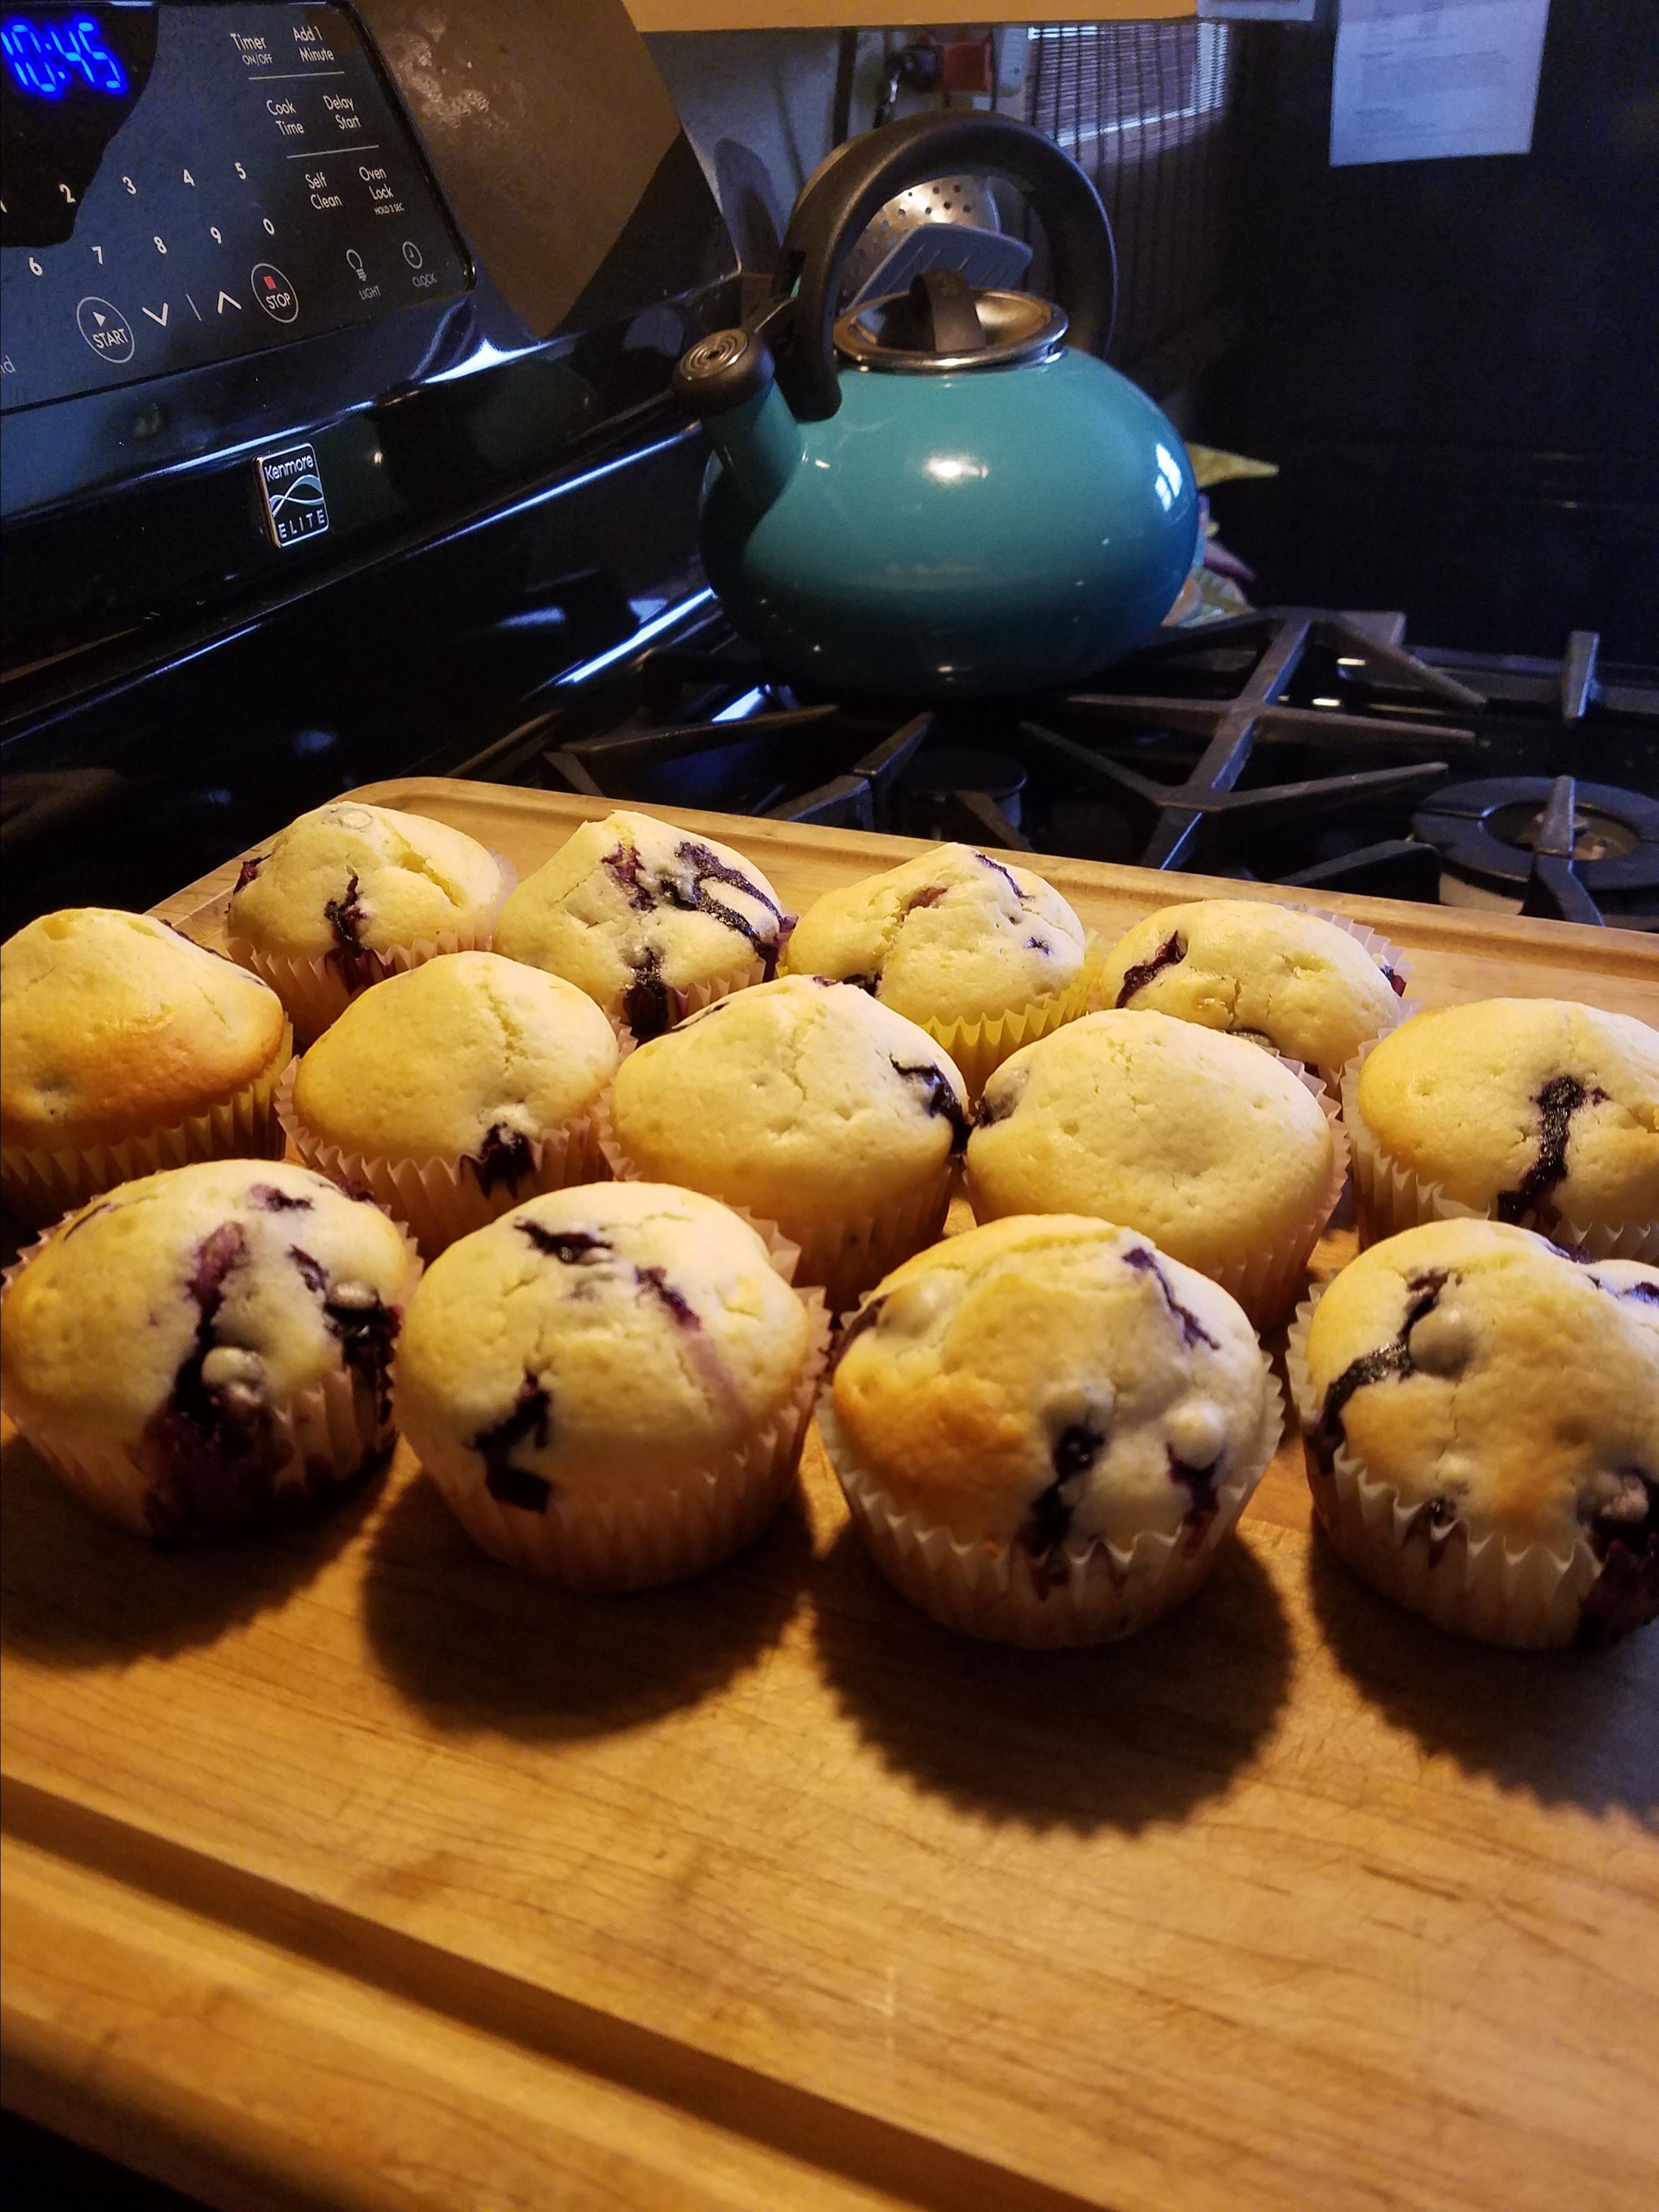 Easy Blueberry Muffins I 